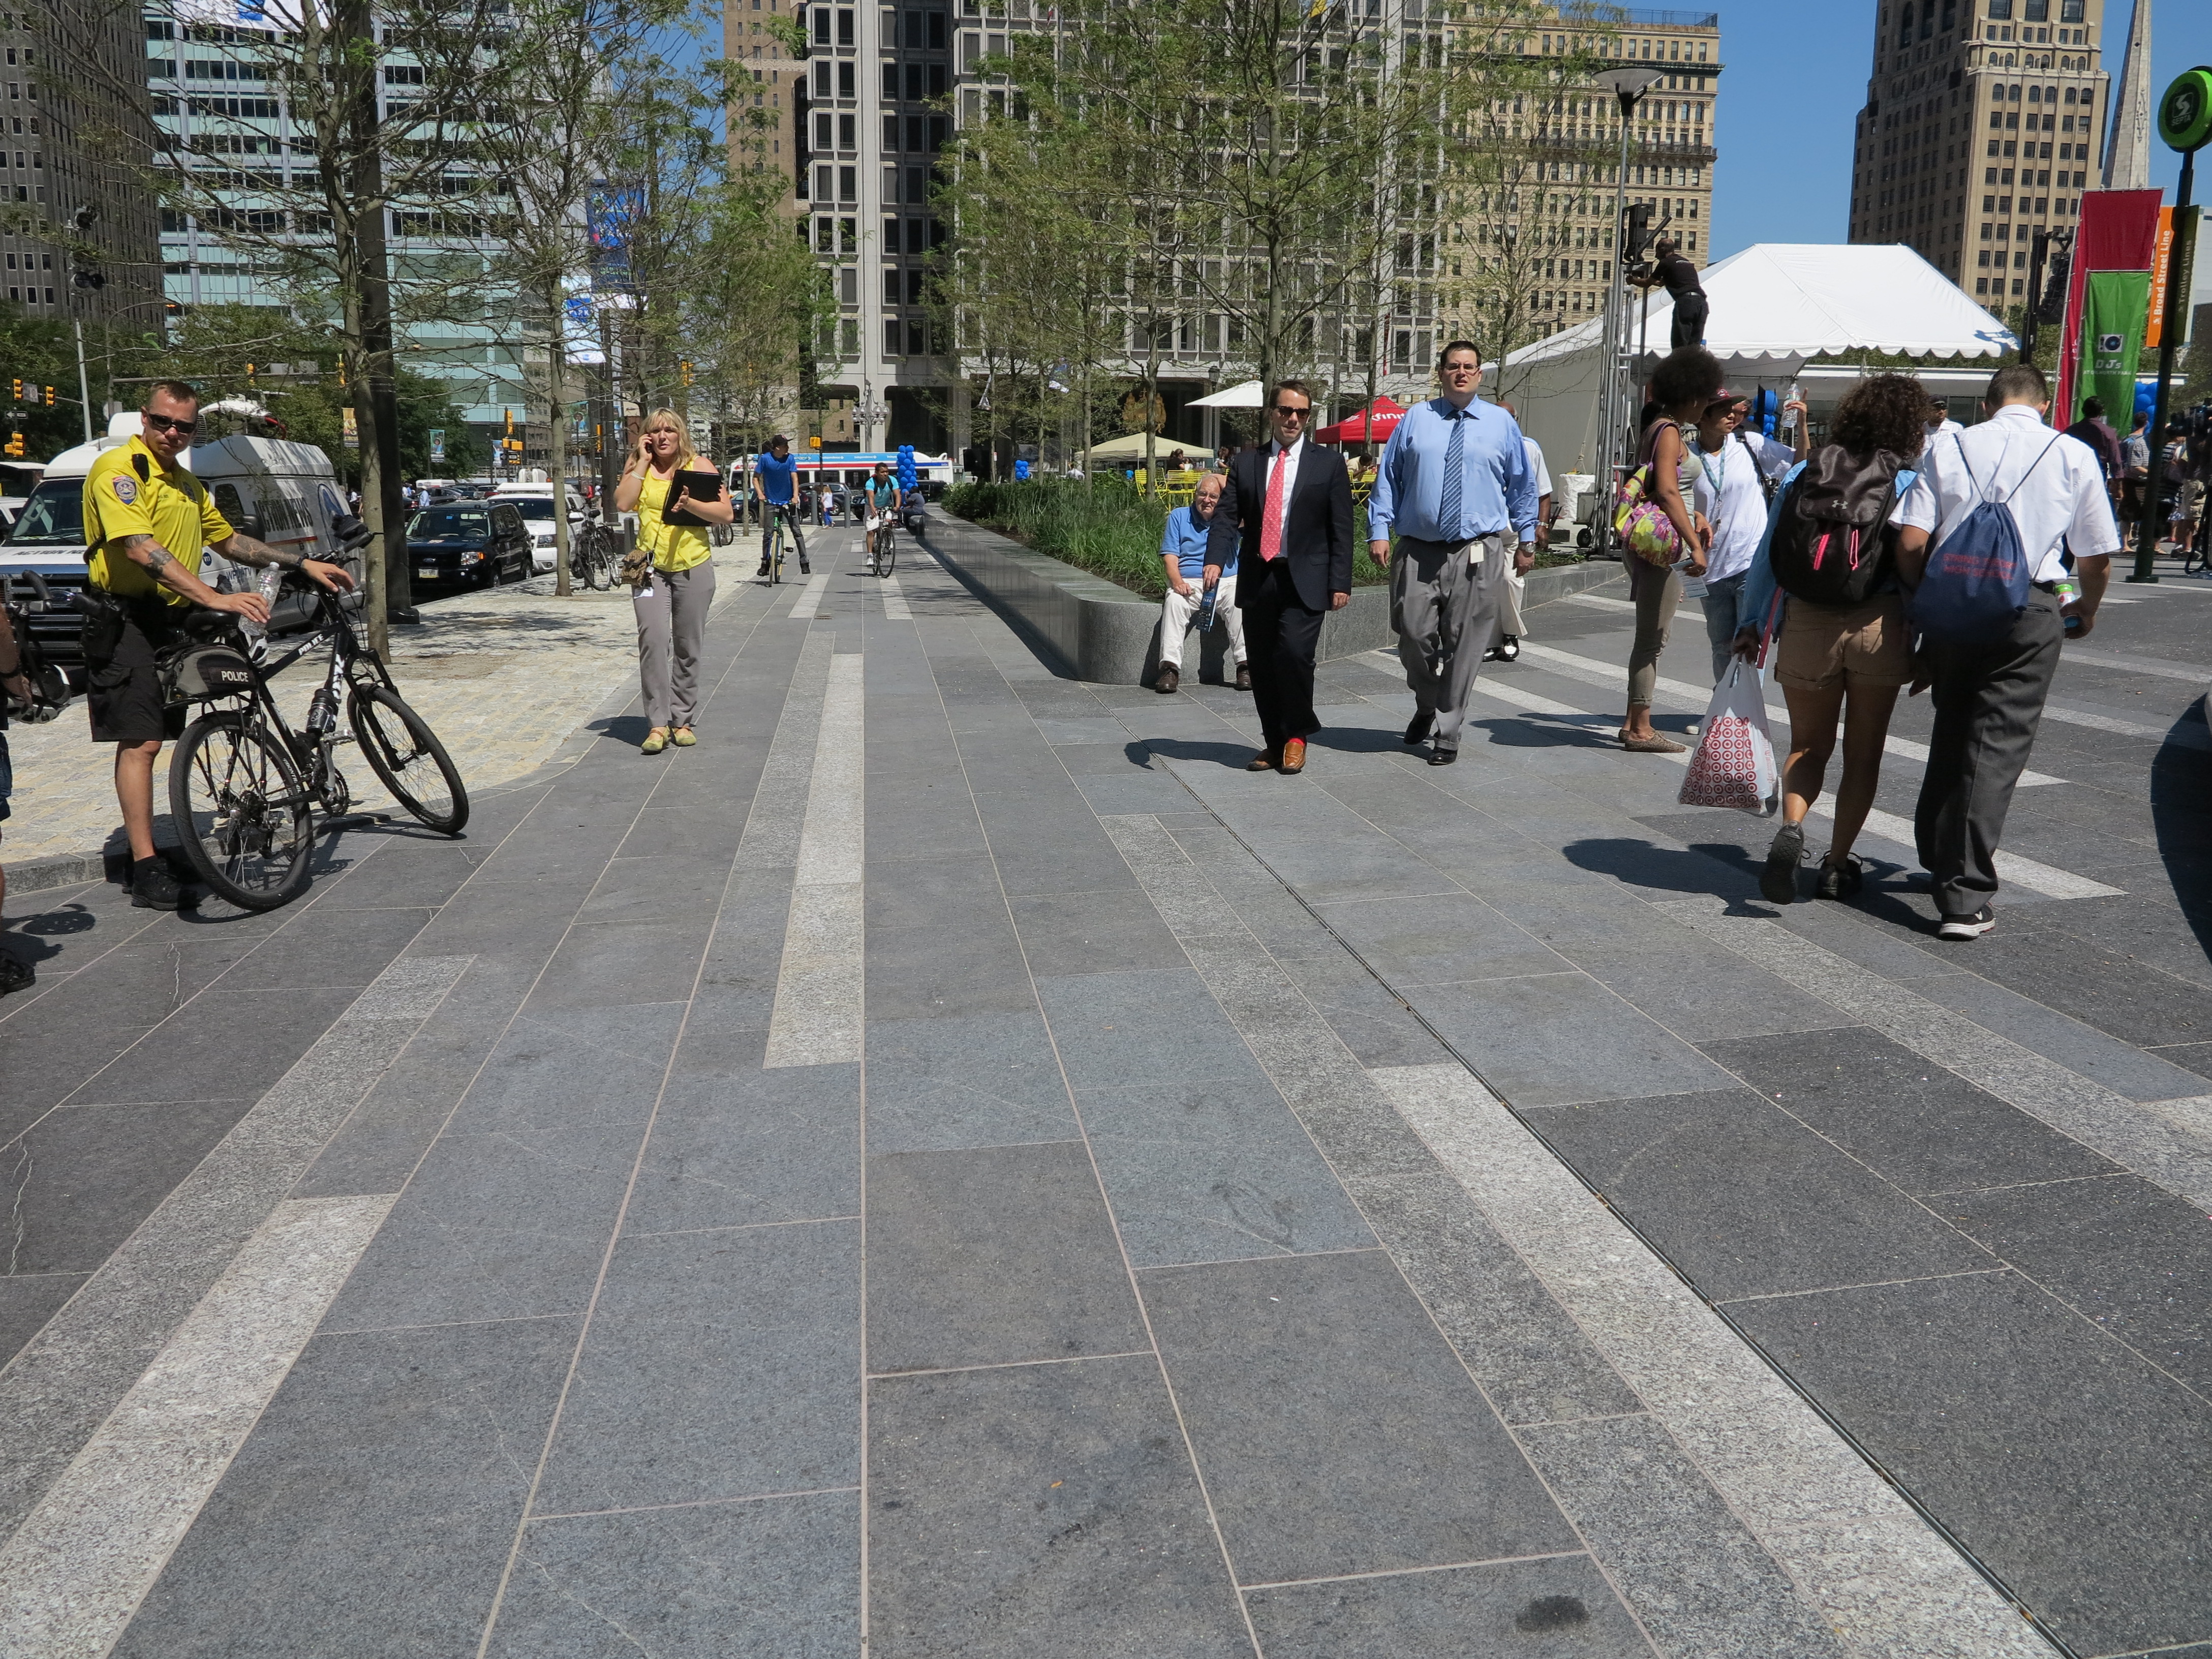 Bands of granite in different tones and textures at Dilworth Park